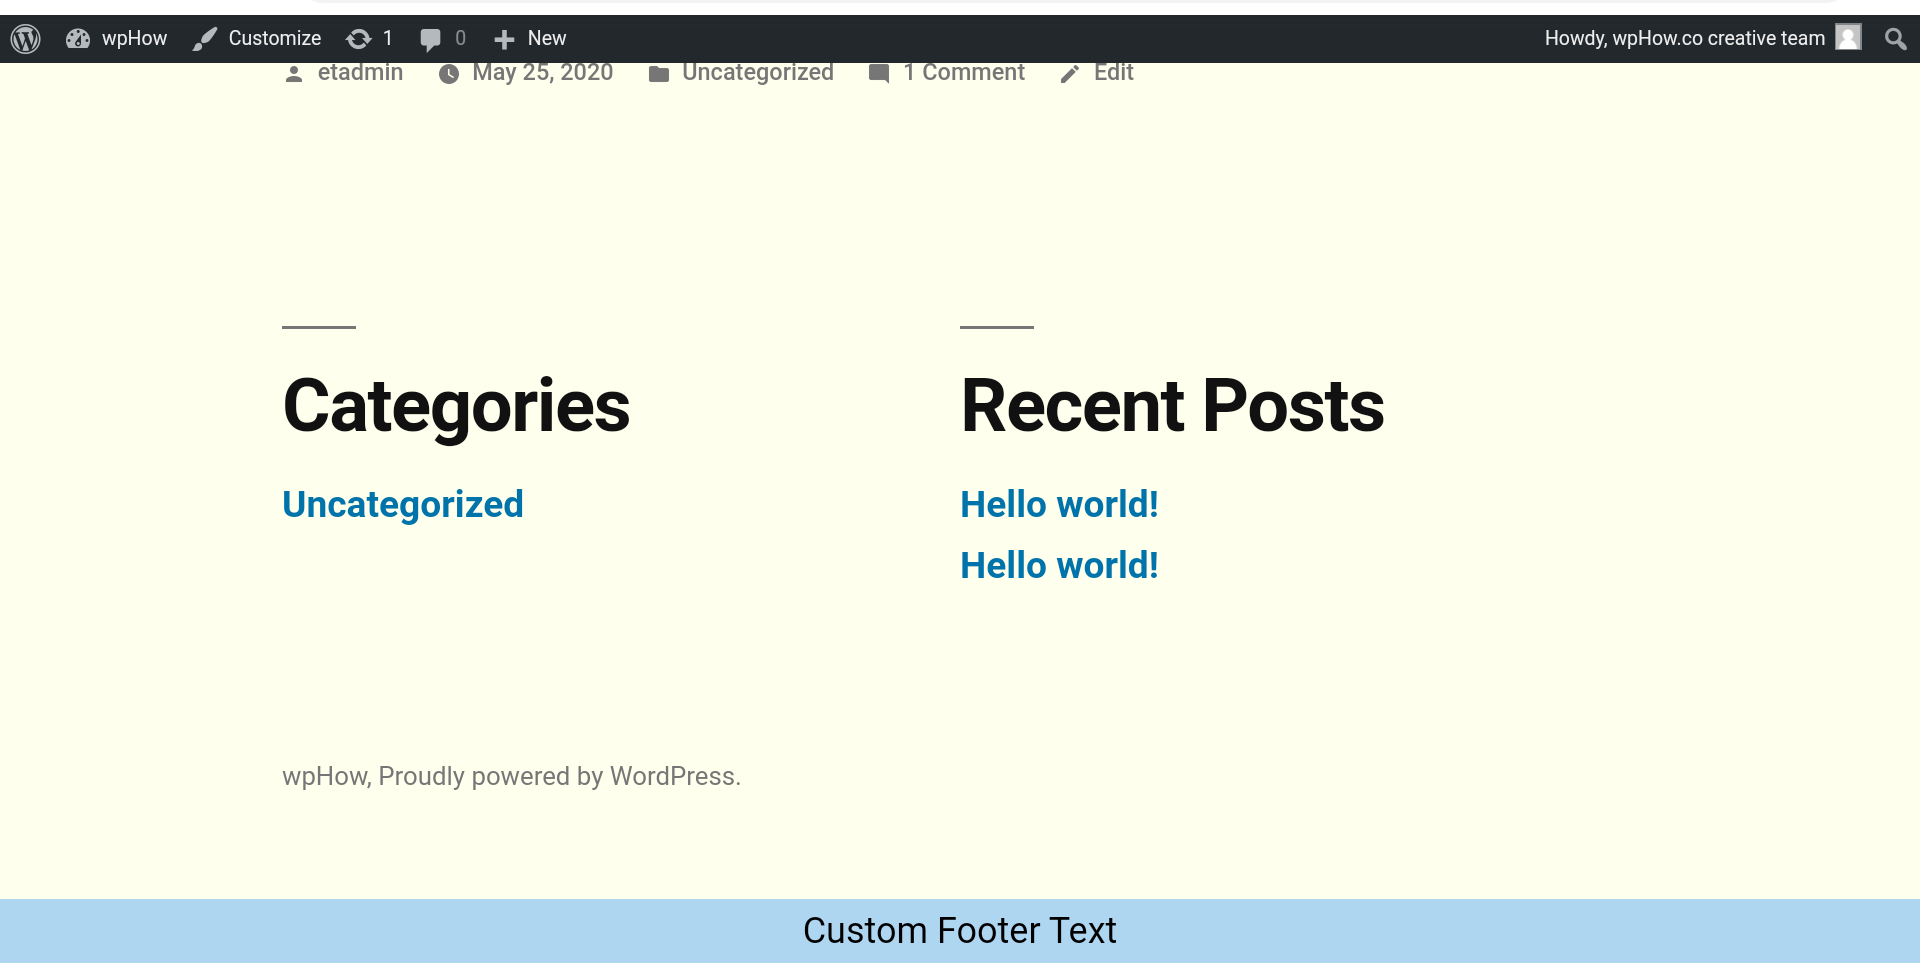 custom-footer-text-image